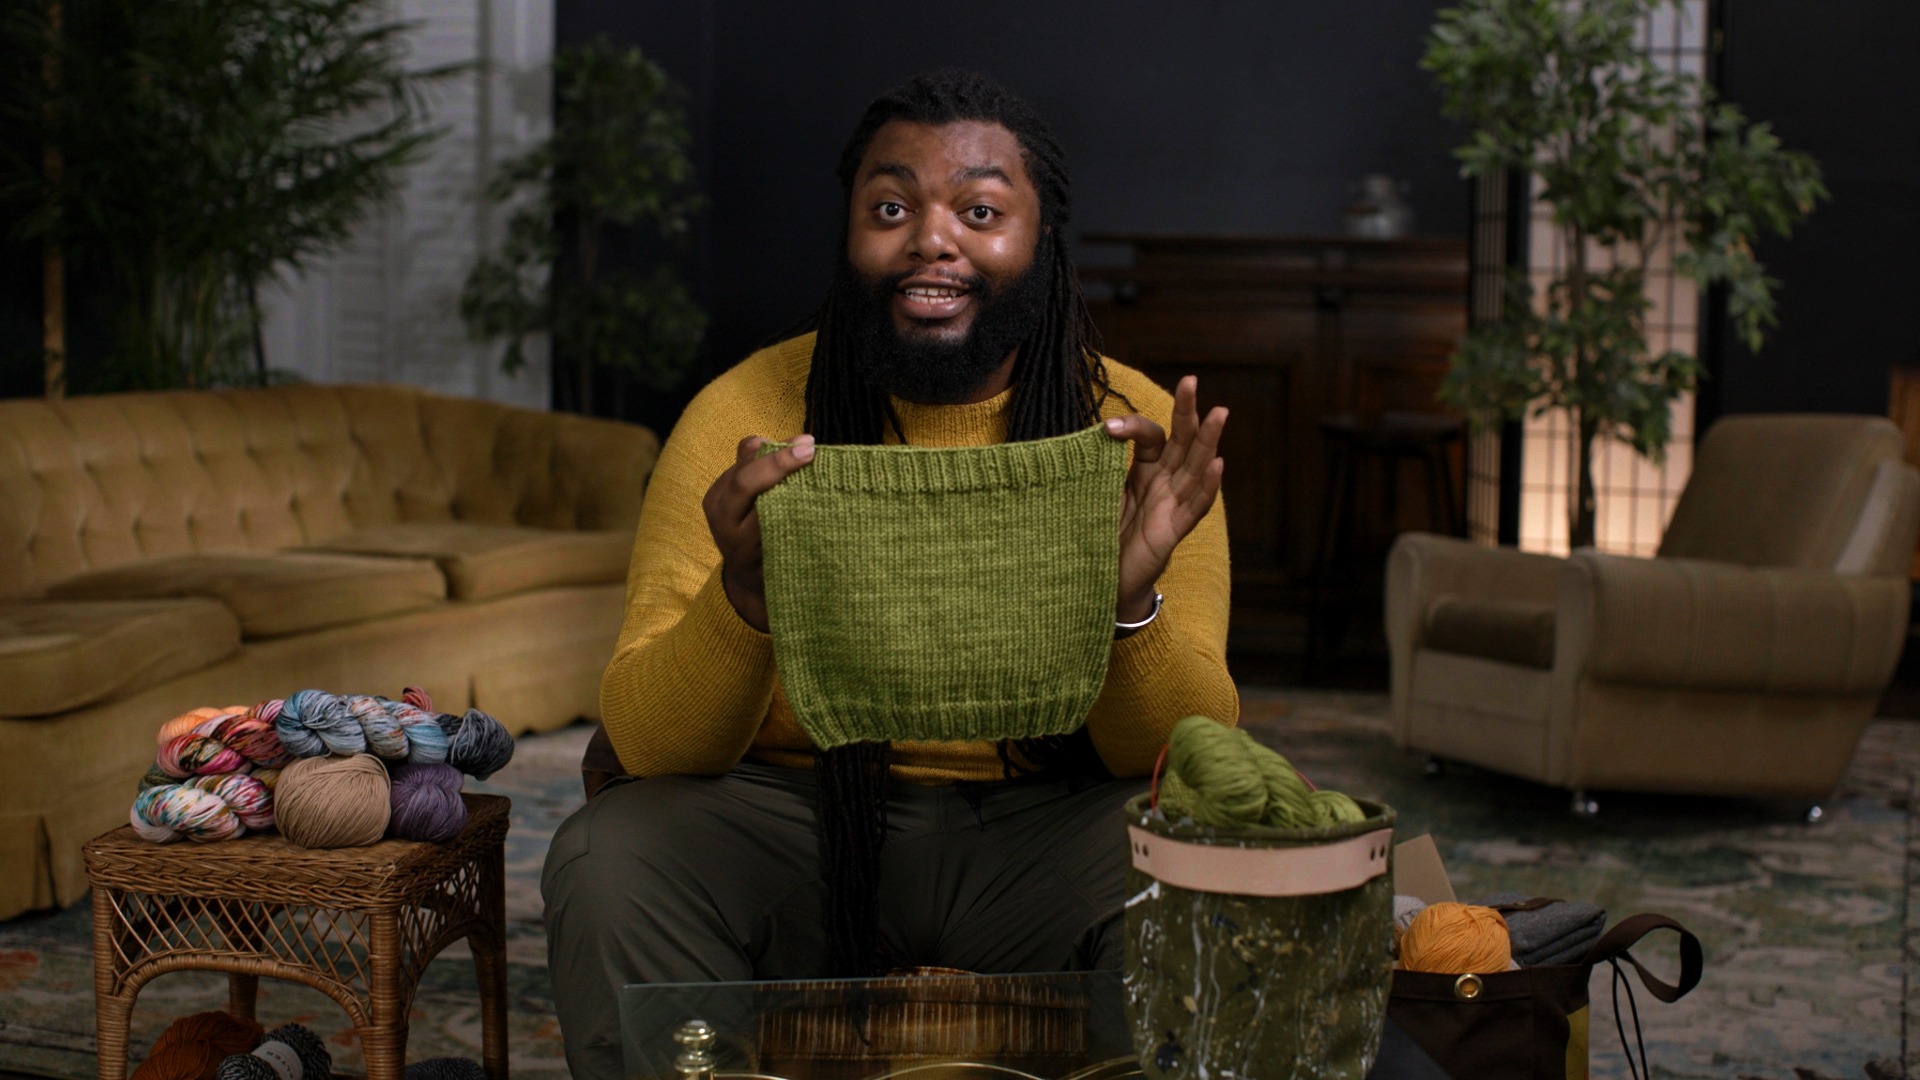 An artist in a yellow sweater sits in a living room holding a green, knitted cowl. To the left a few rolls of yarn sit on a wicker table. The right two bags of yarn are visible.